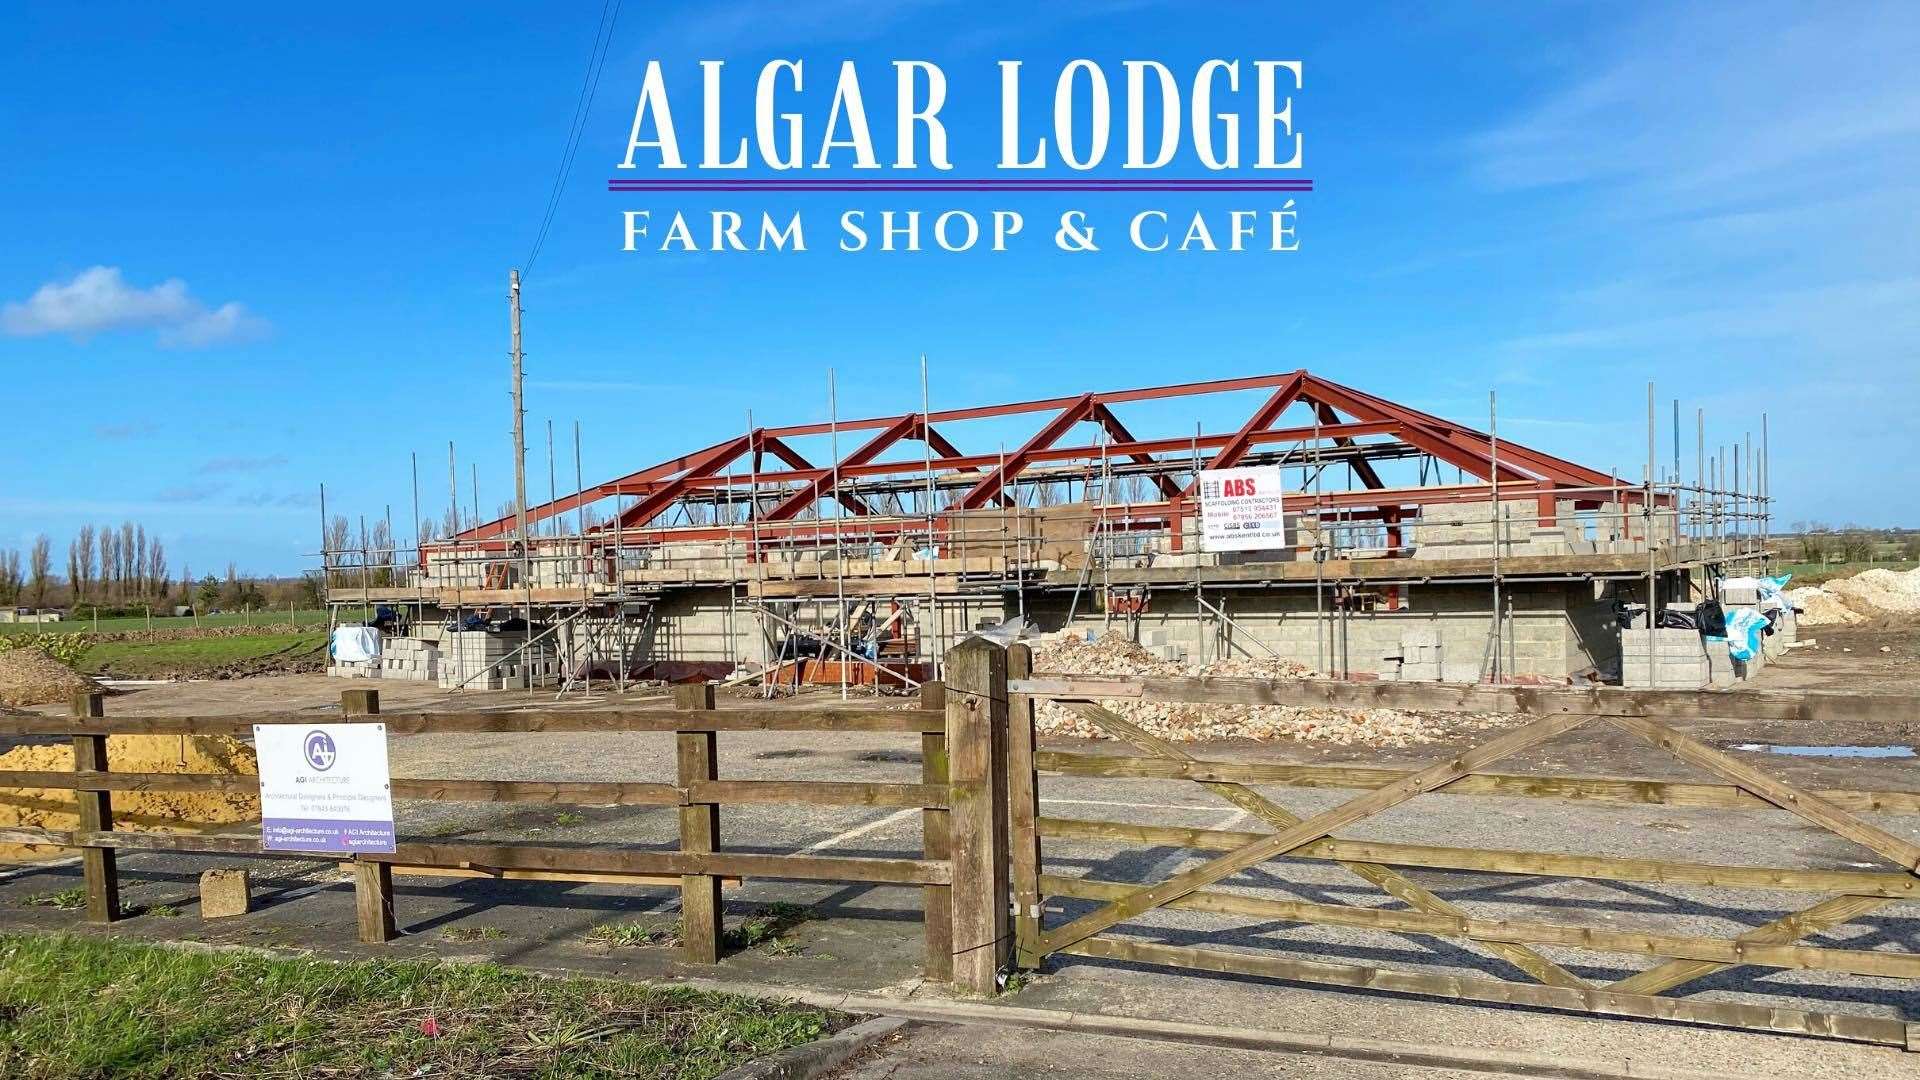 The Algar family bought the site in October 2017 and have built a brand new farm shop